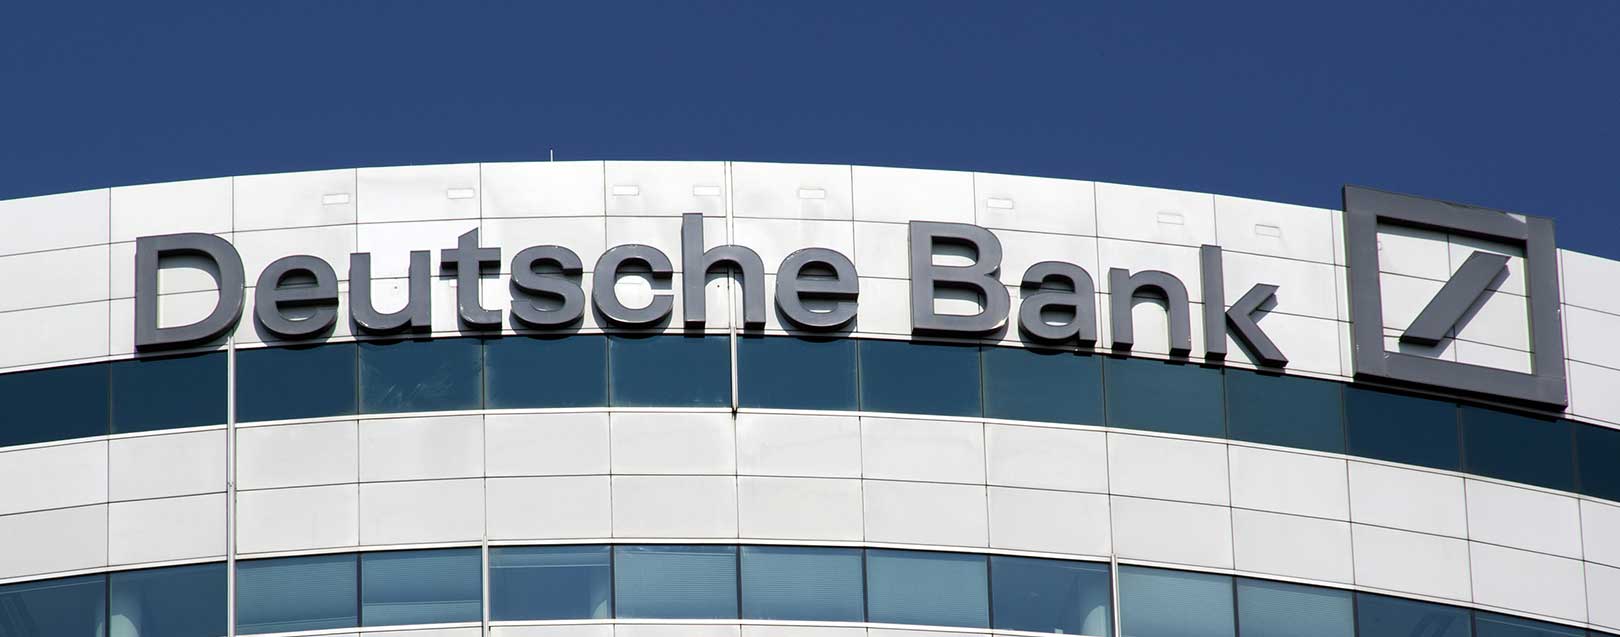 Deutsche Bank agree to $7.2 bn settlement with US over risky mortgages